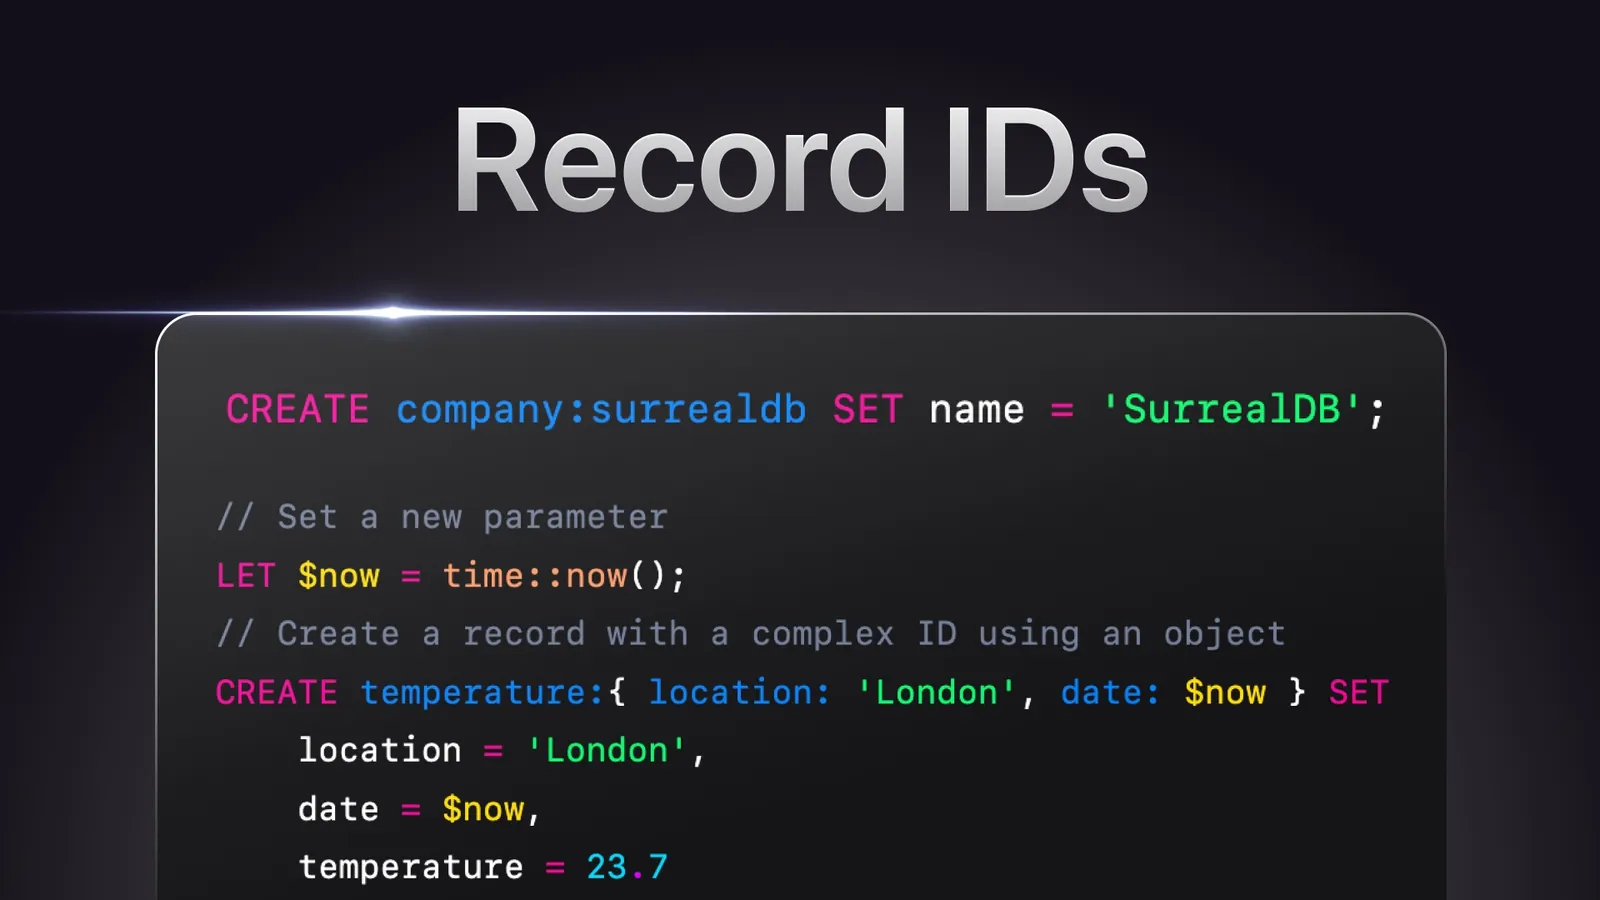 The life-changing magic of SurrealDB record IDs